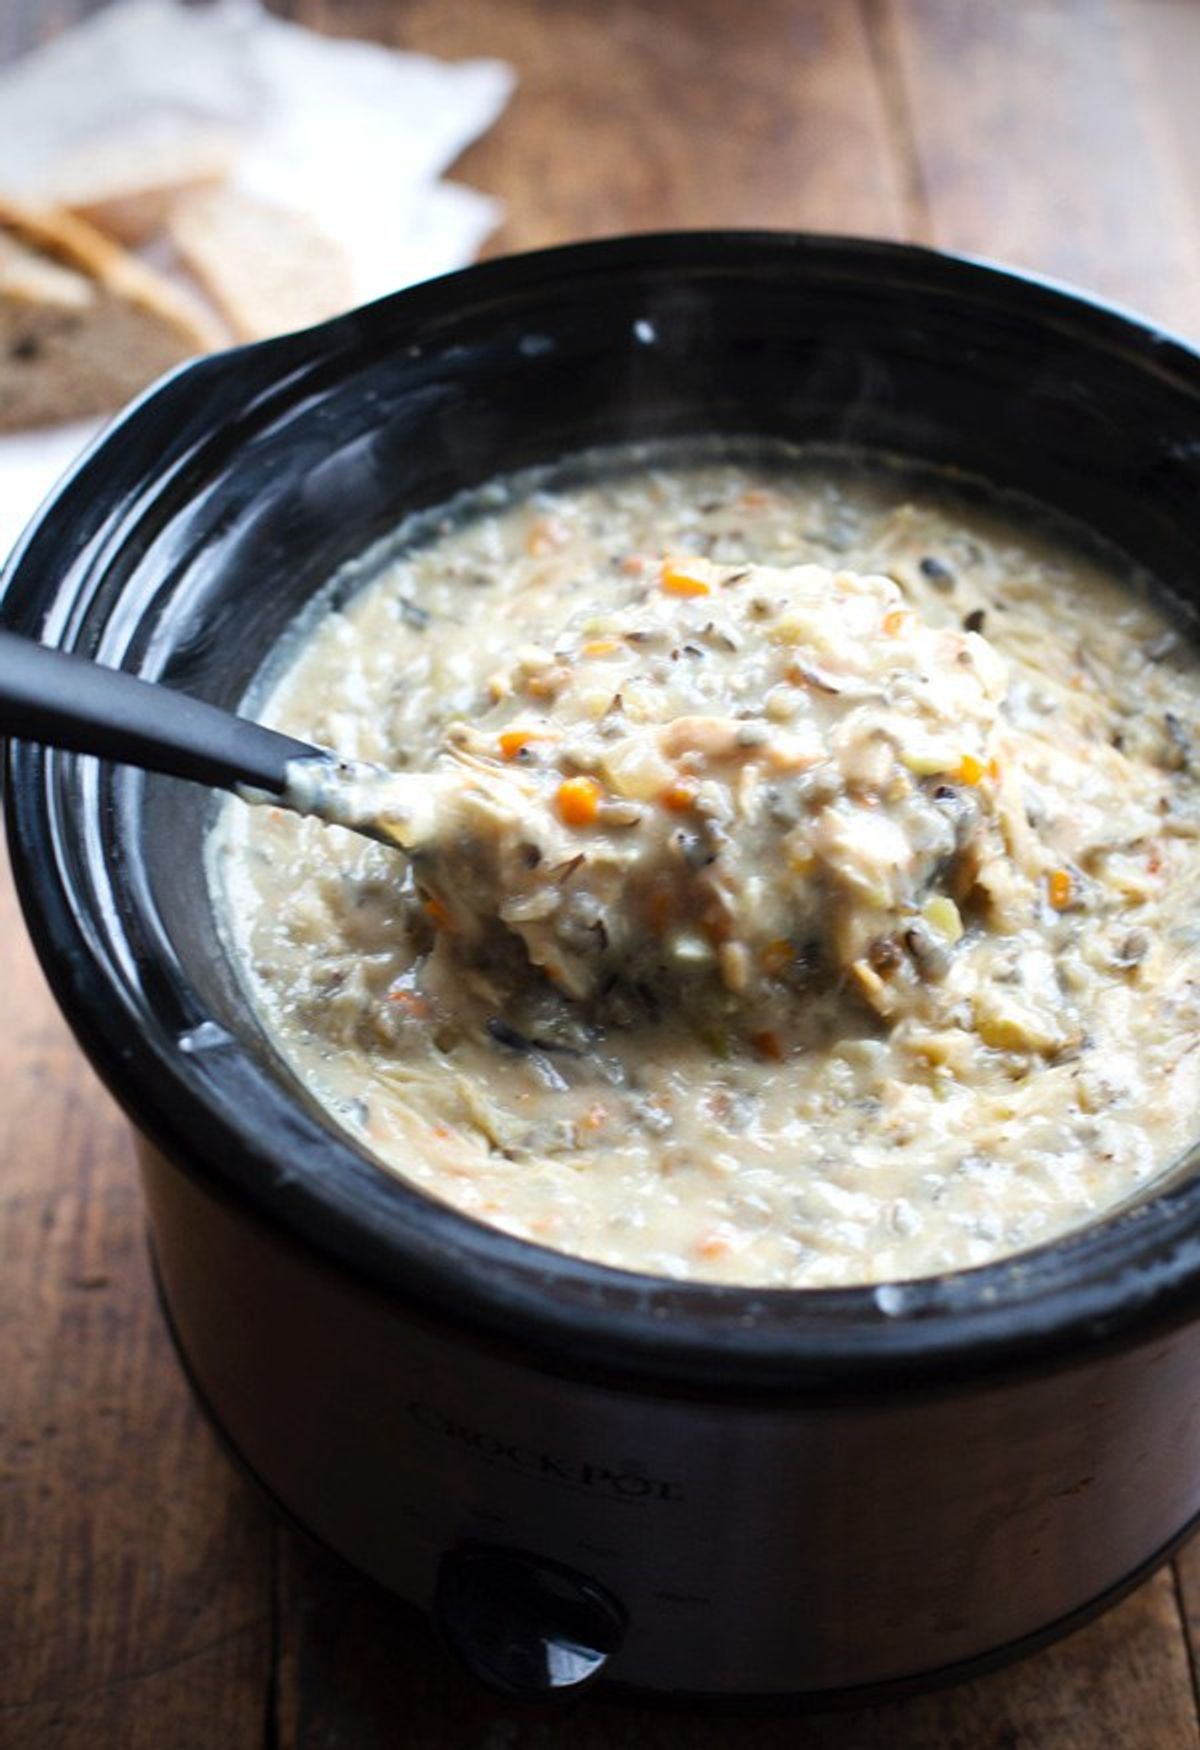 10 Pinterest Crock Pot Meals That Will Change Your Life